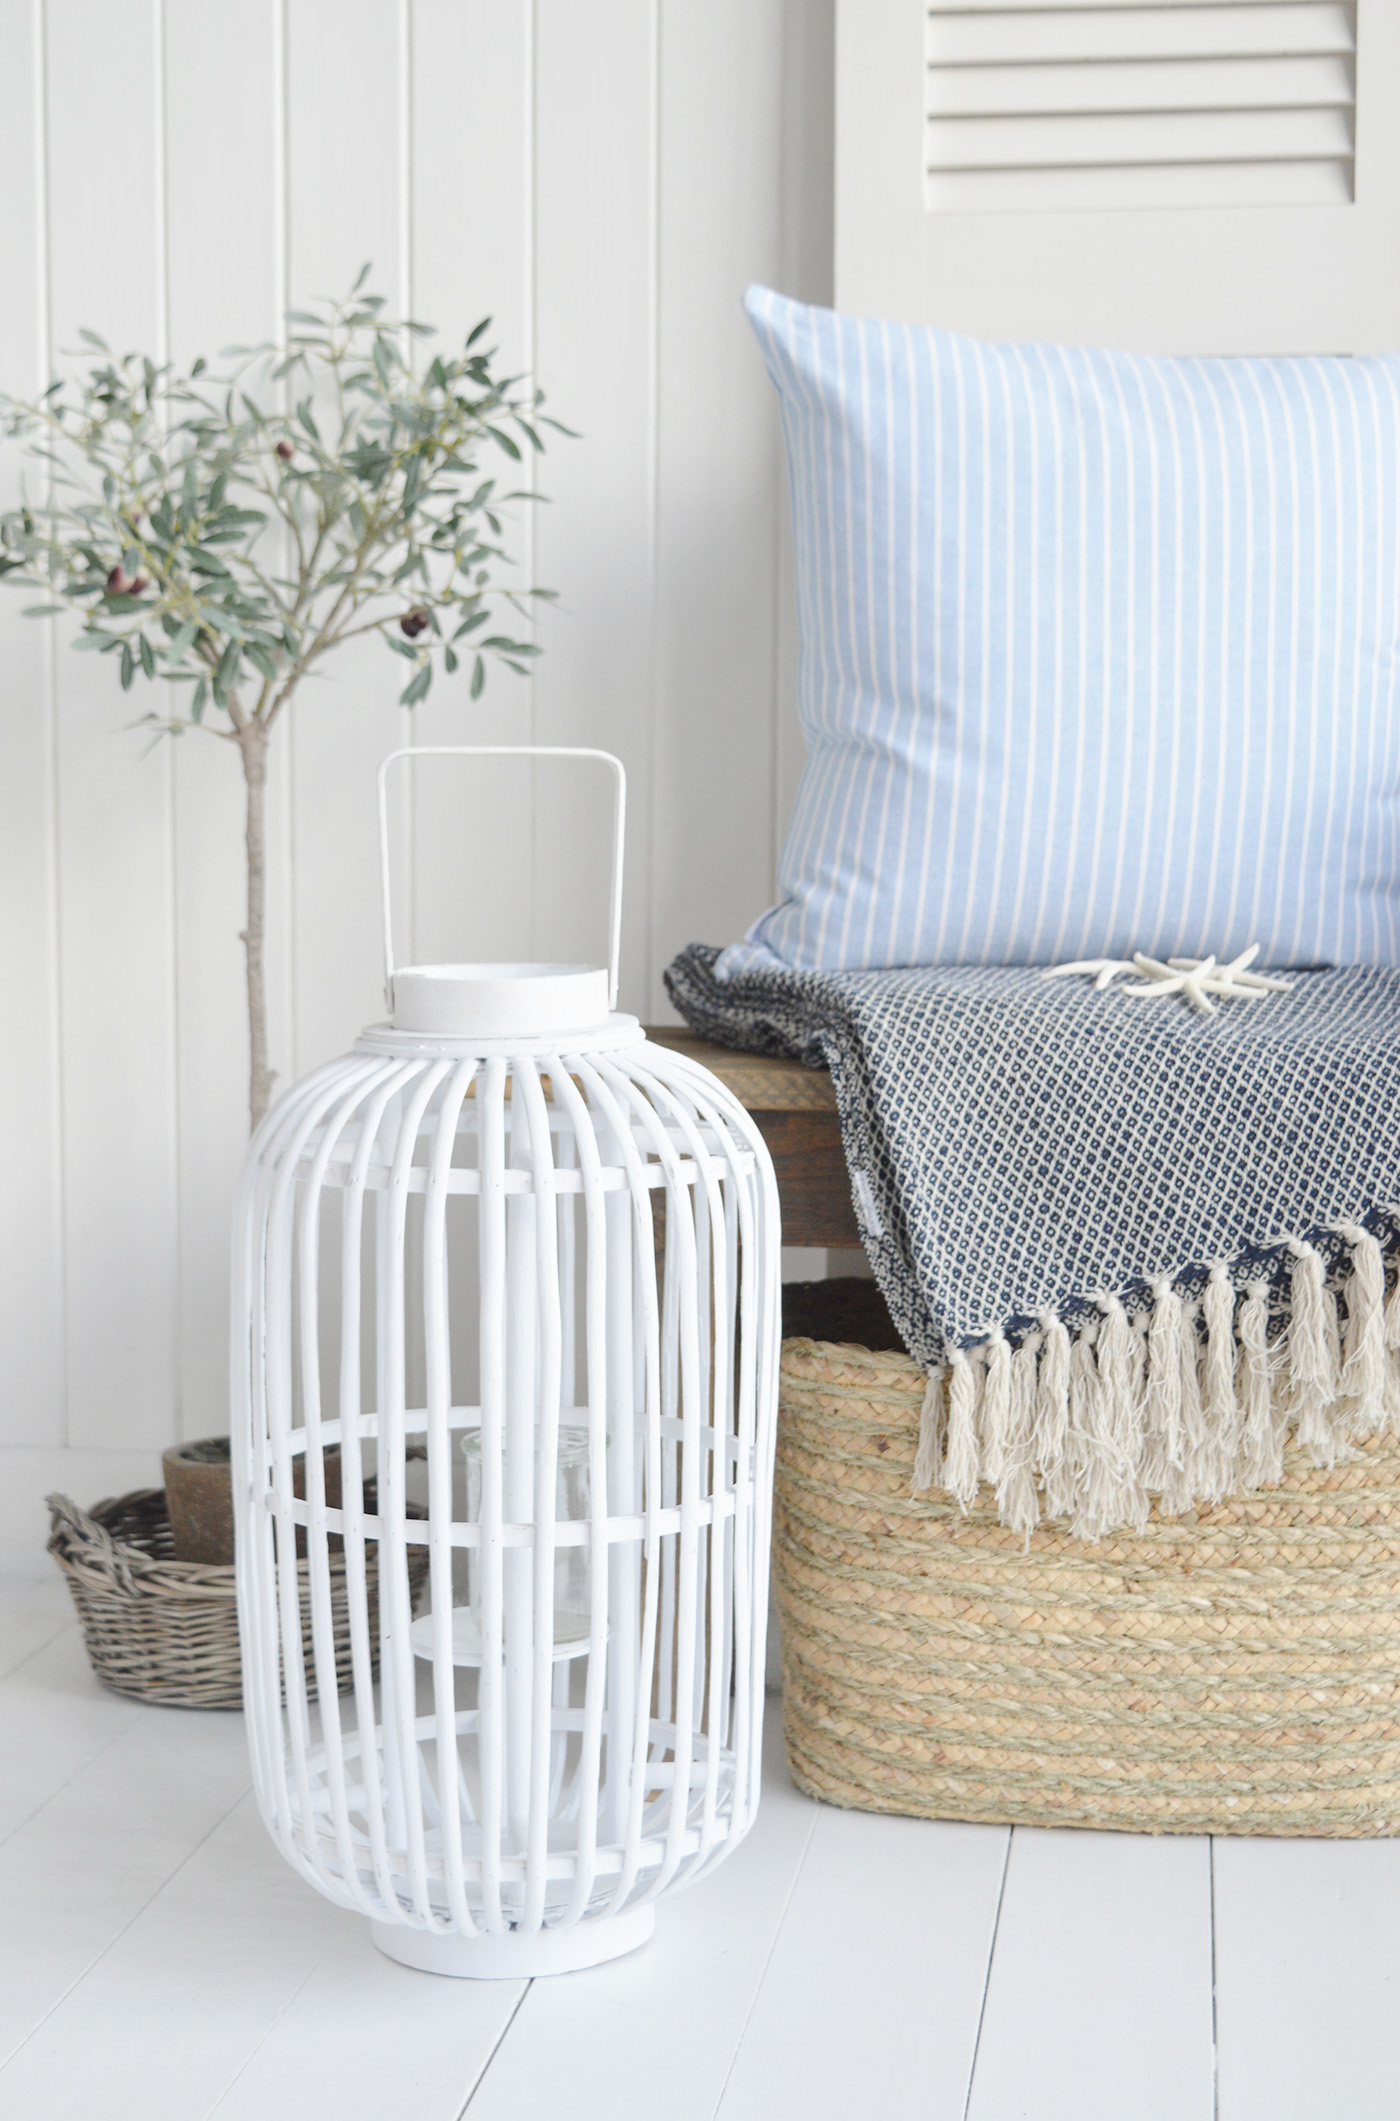 White Willow Lantern for New England stely furniture and accessories for coasta, country and farmhouse styled interiors and homes